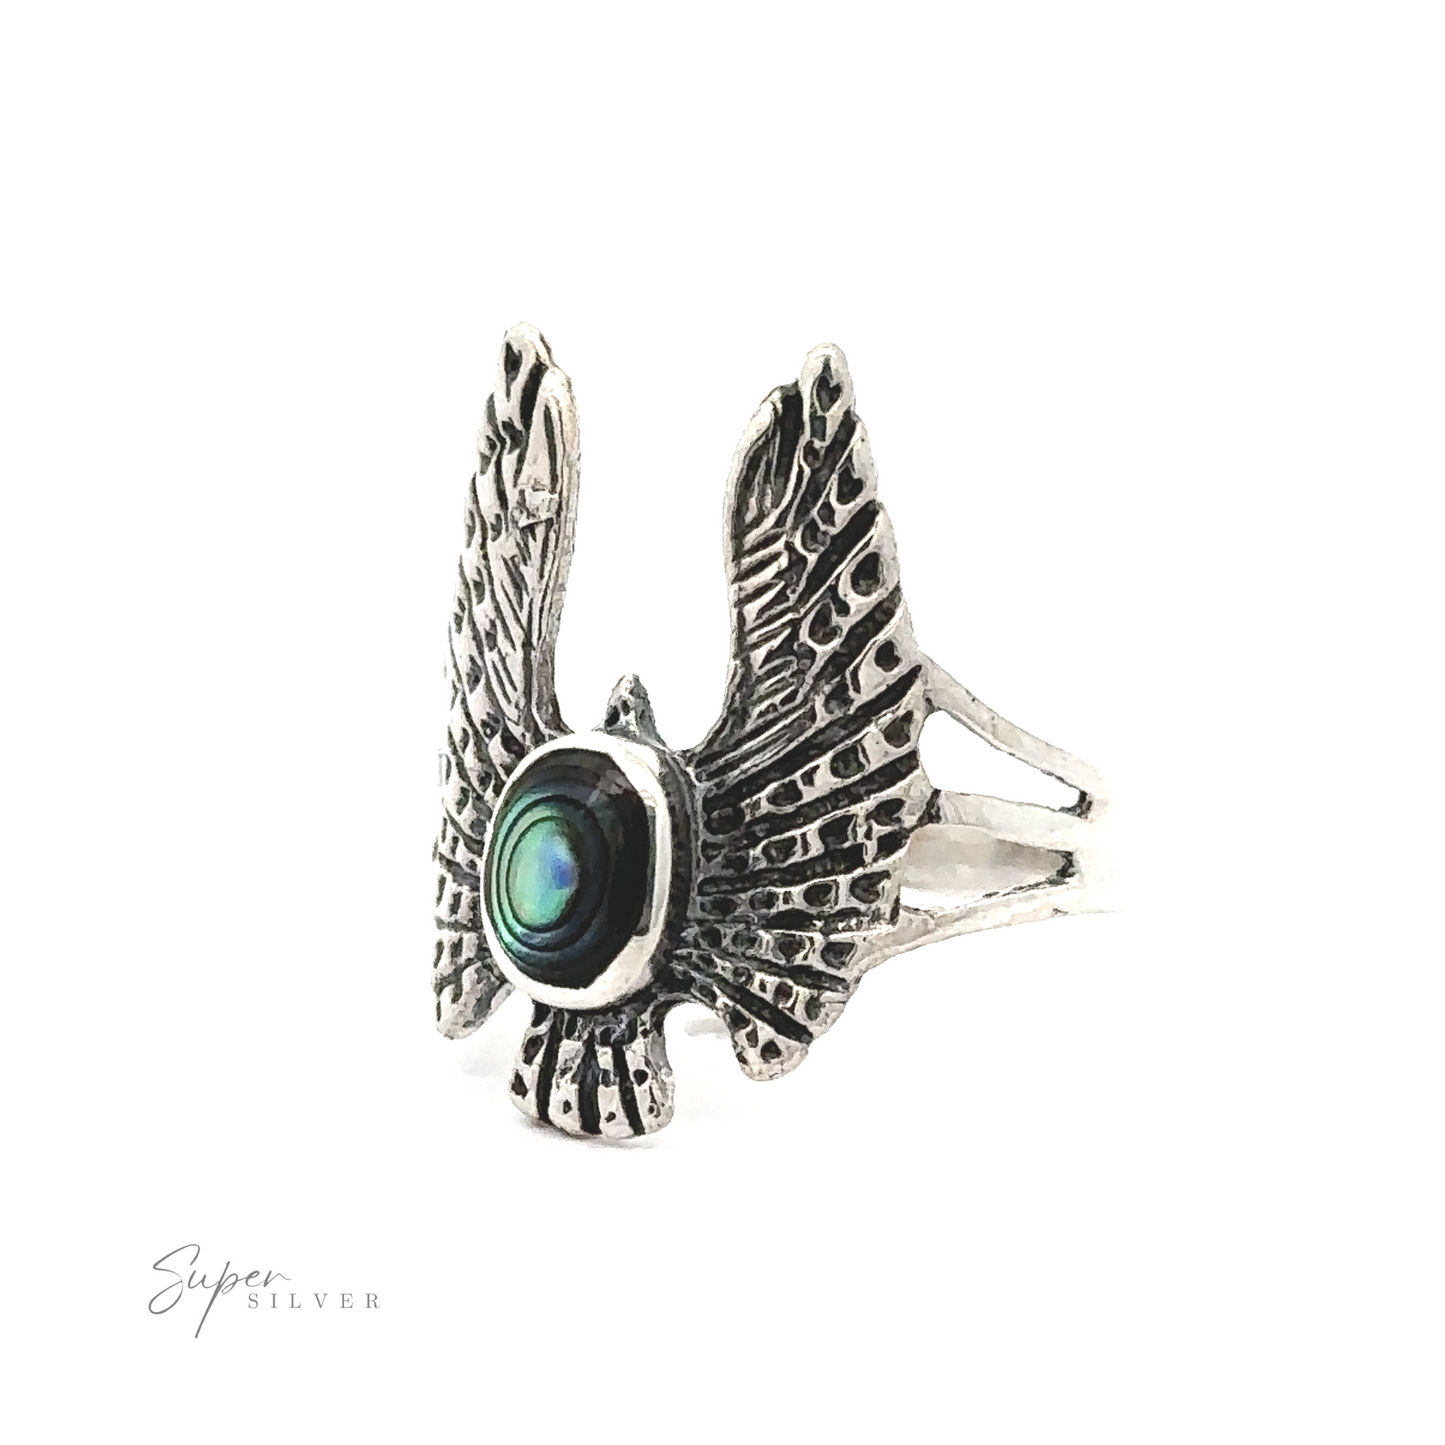 
                  
                    Inlaid Stone Ring with Eagle Wings designed like spread eagle wings with a central iridescent green stone, on a white background with a logo labeled "super silver.
                  
                